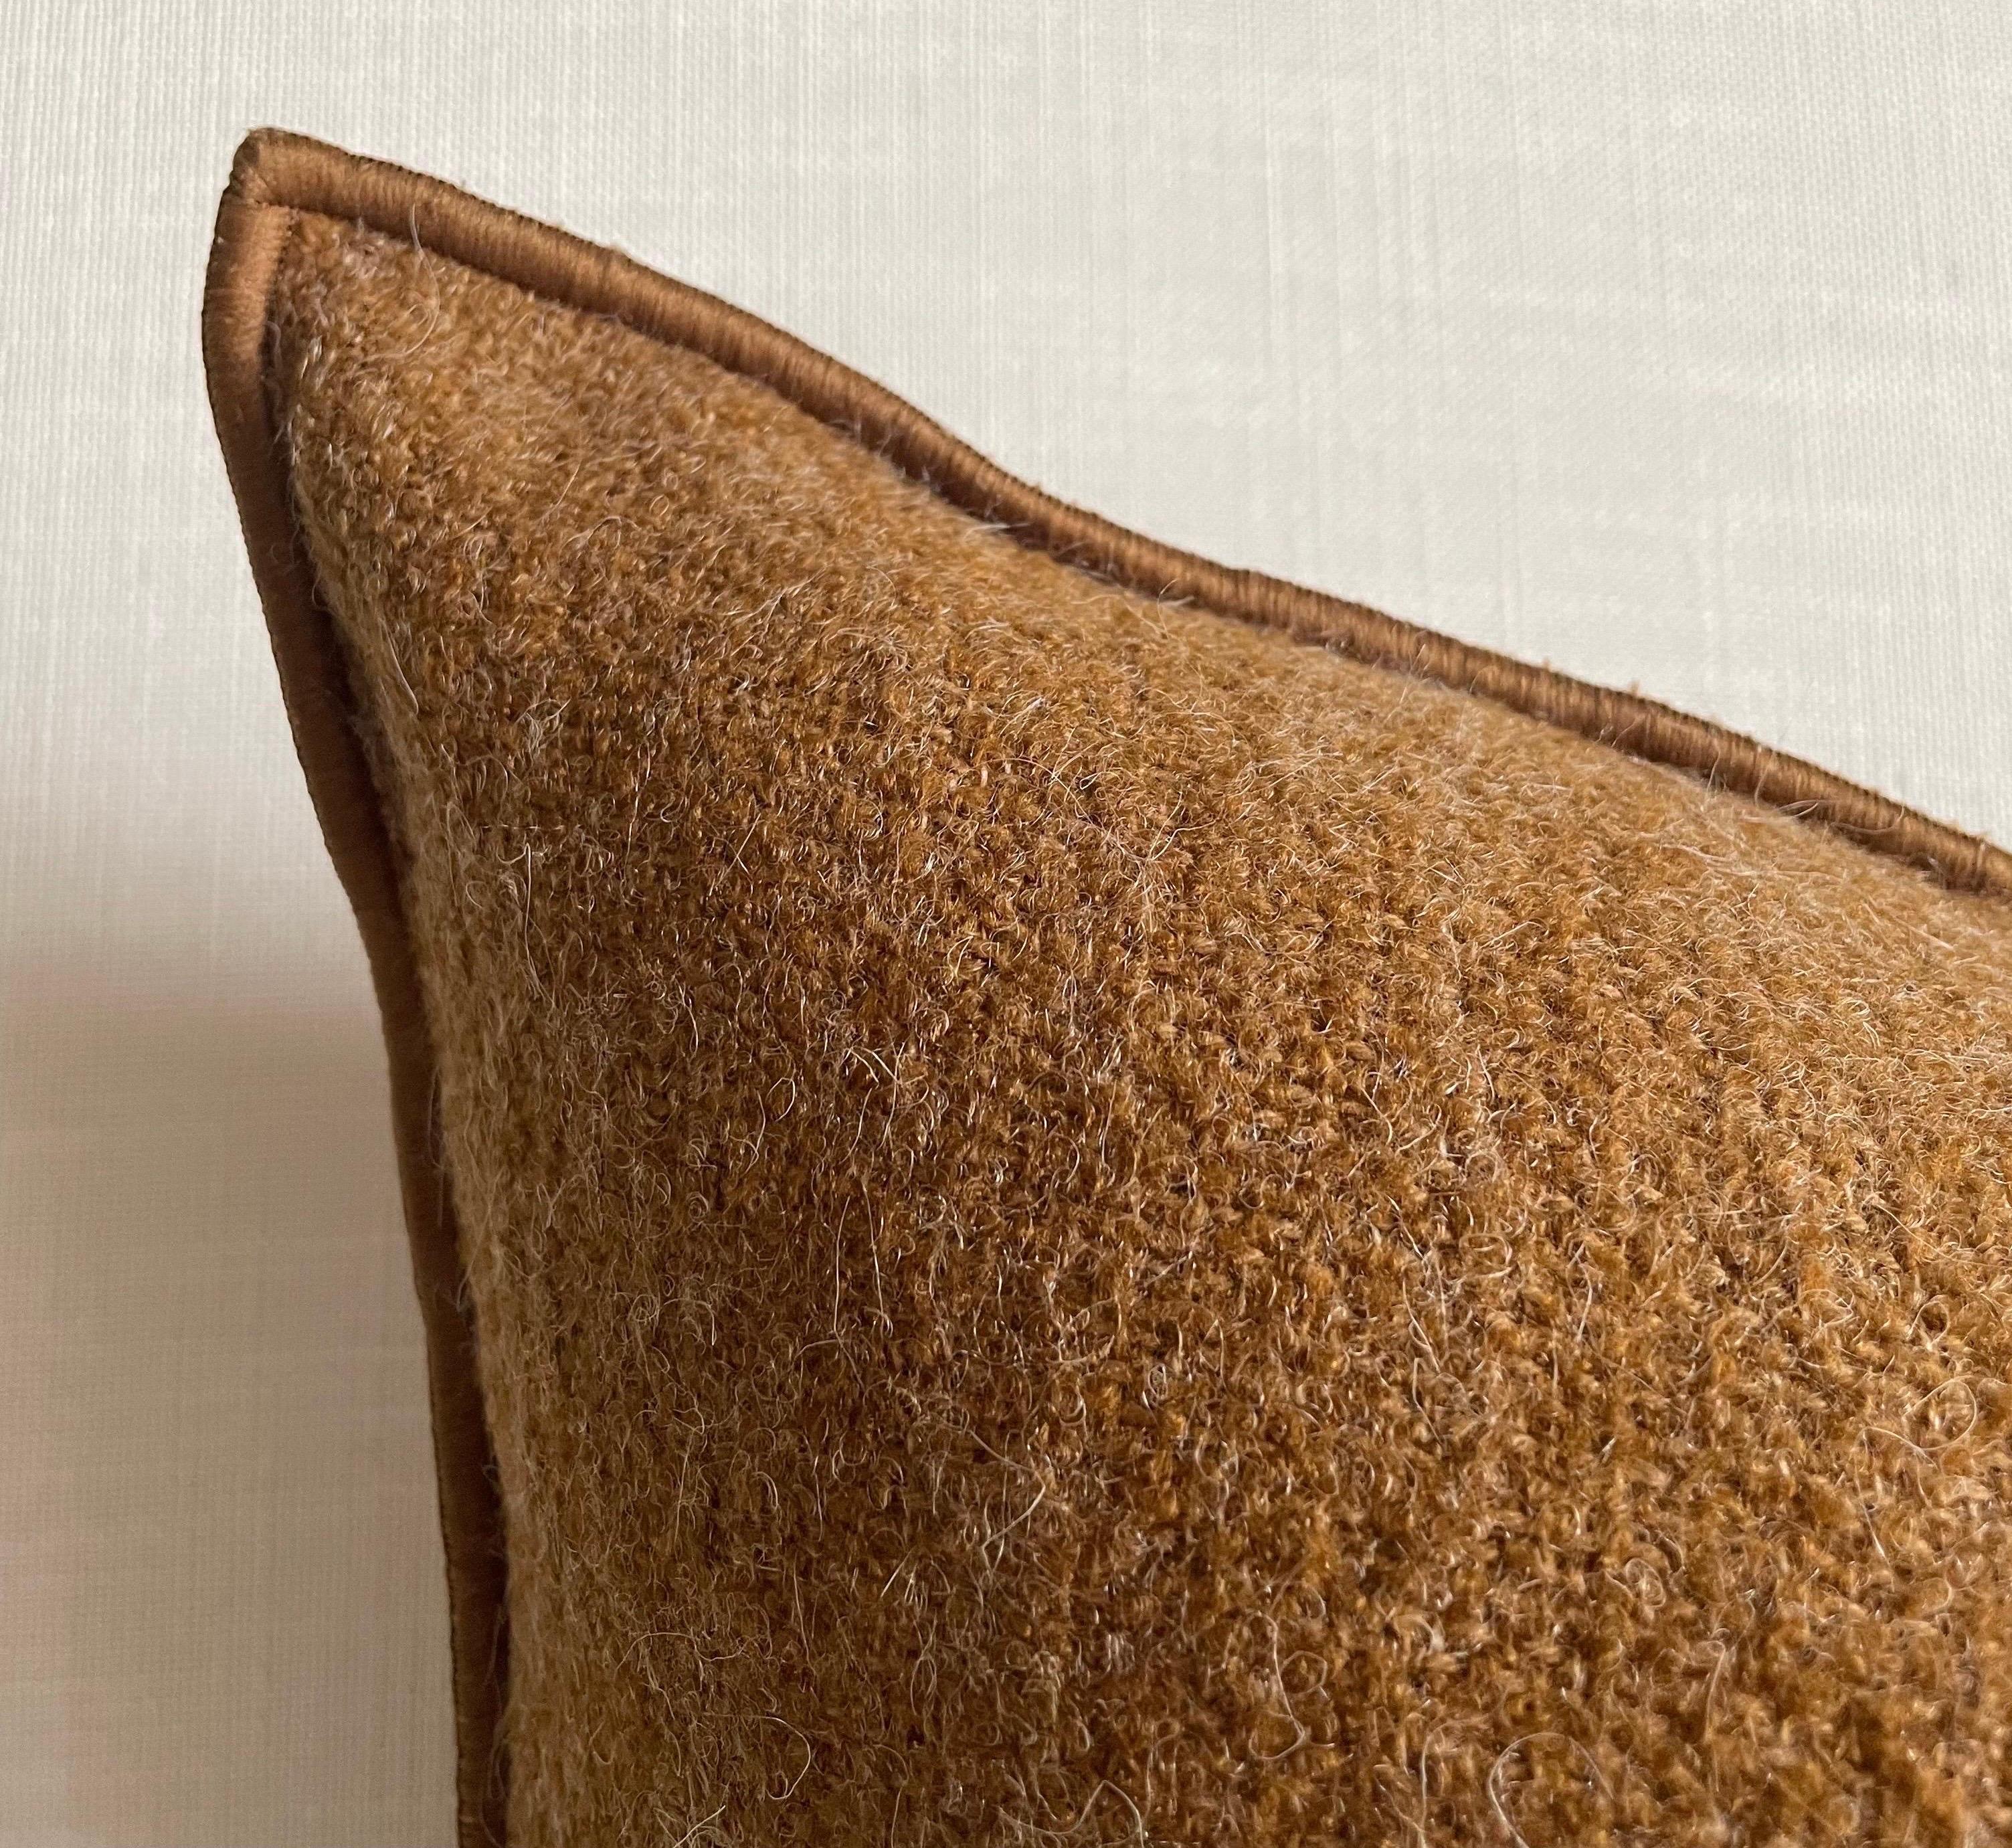 Custom wool blend accent pillow with down insert 
Color: Havane A deep rust colored nubby boucle style pillow with a stitched edge, metal zipper closure. 
Our pillows are constructed with vintage one of a kind textiles from around the globe.